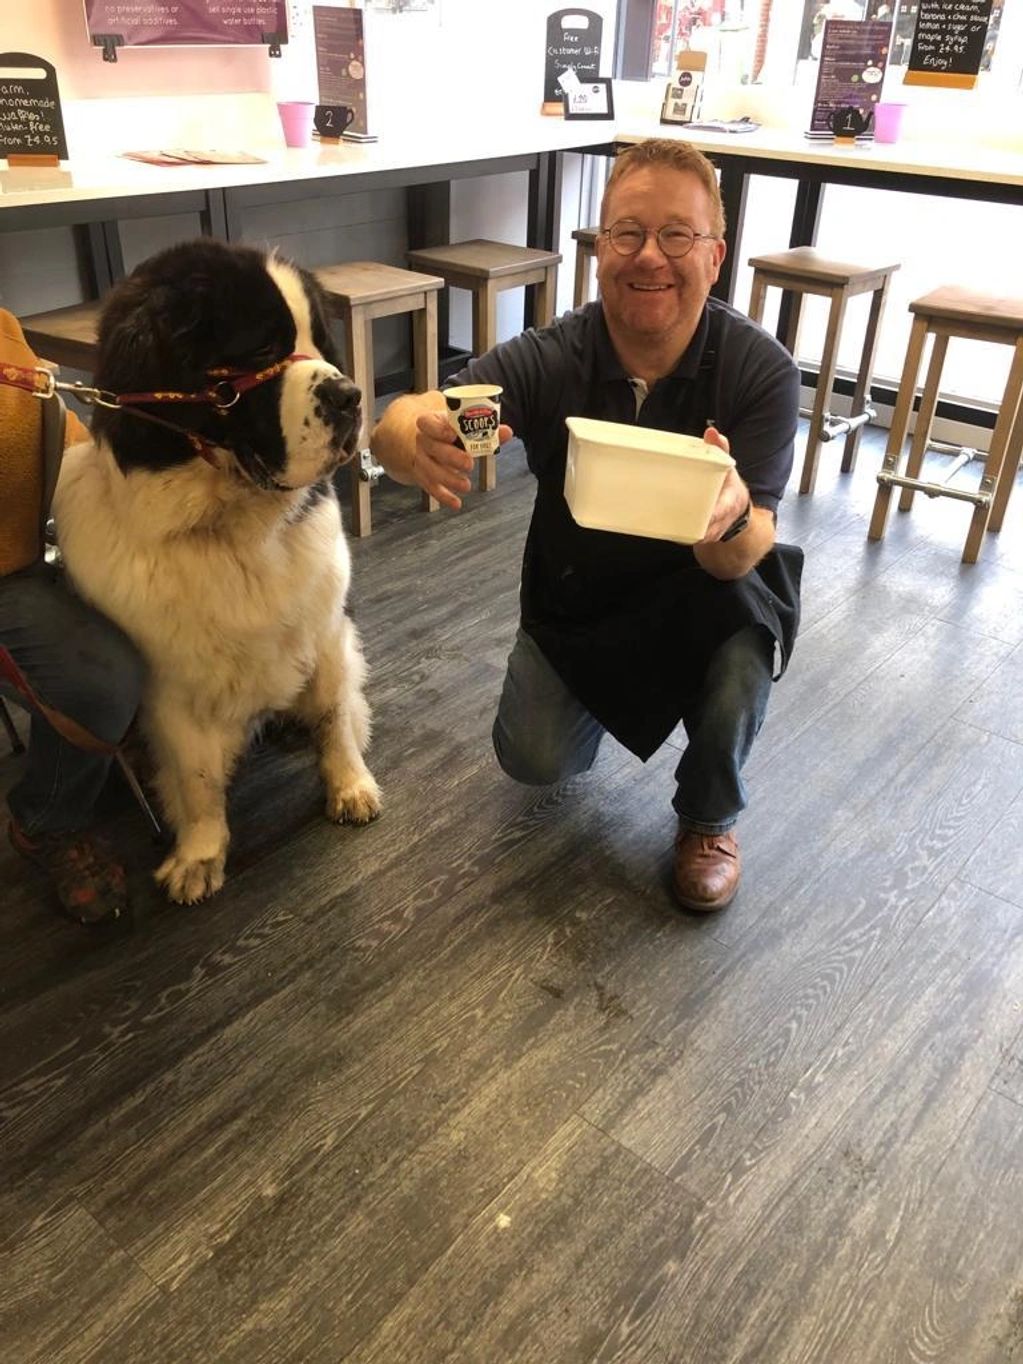 We welcome dogs in the bar area at the front of the cafe. Barney was the first to sample our doggy 